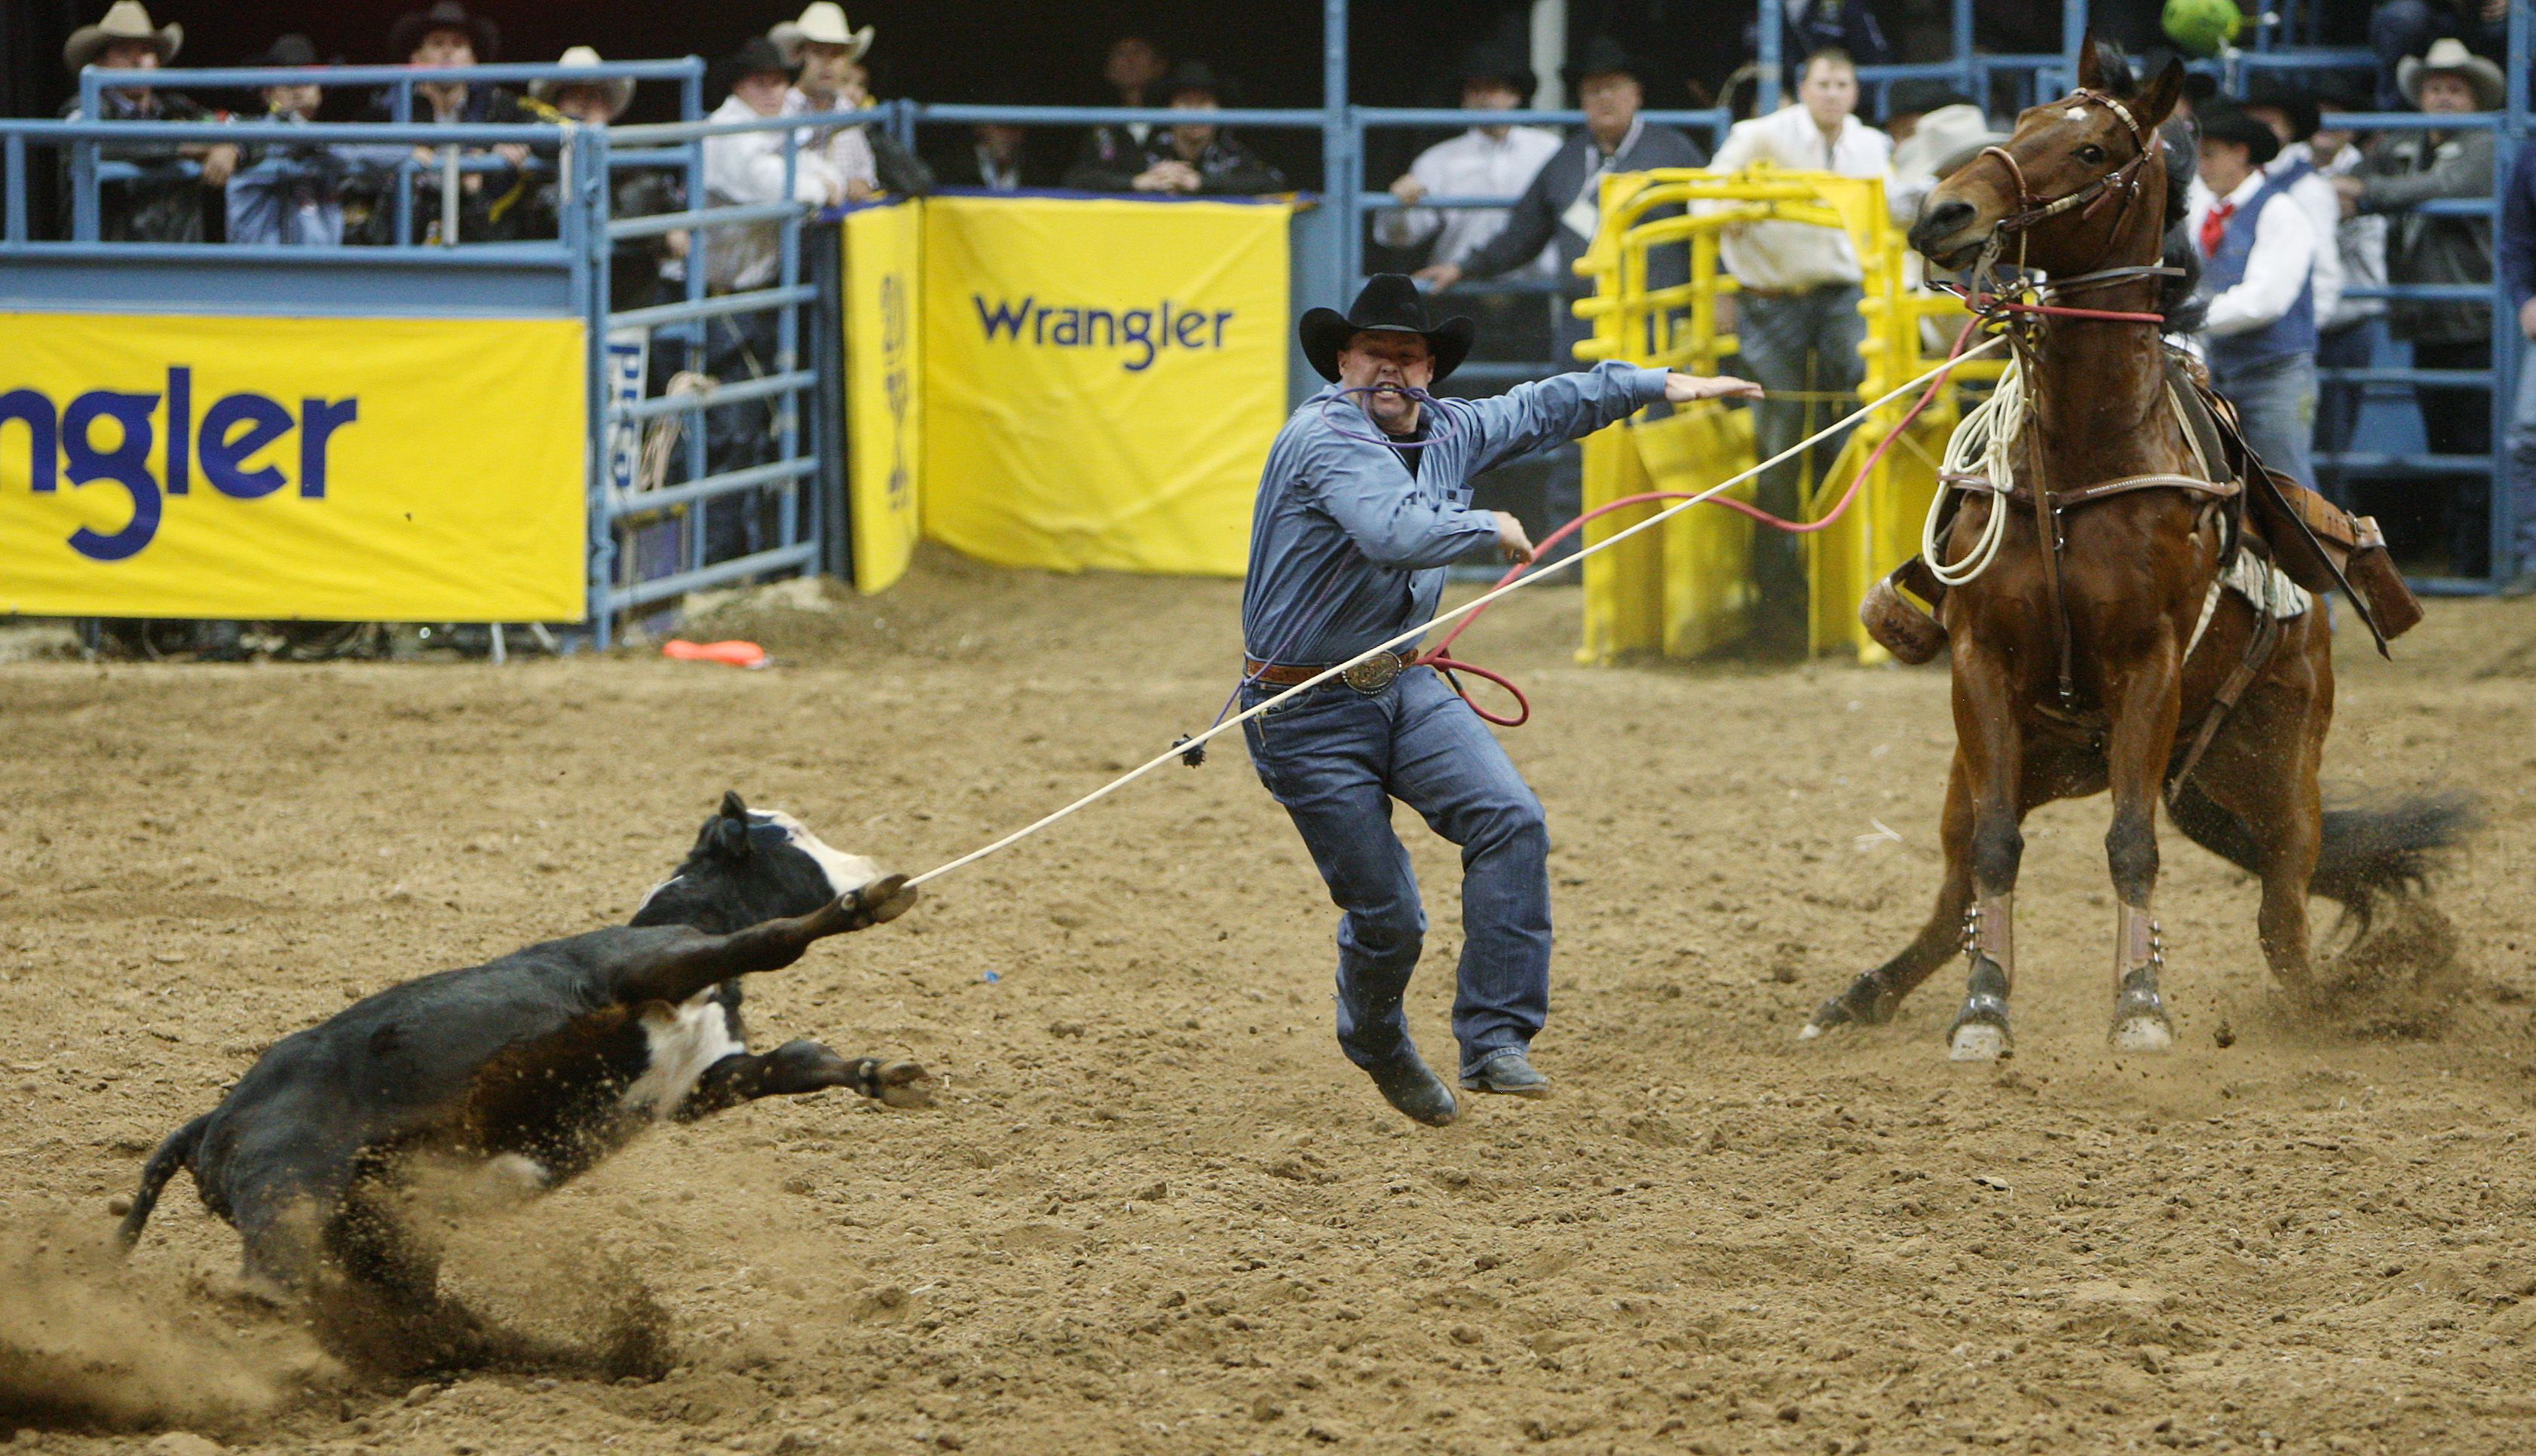 Durfey wins round in tiedown roping The SpokesmanReview